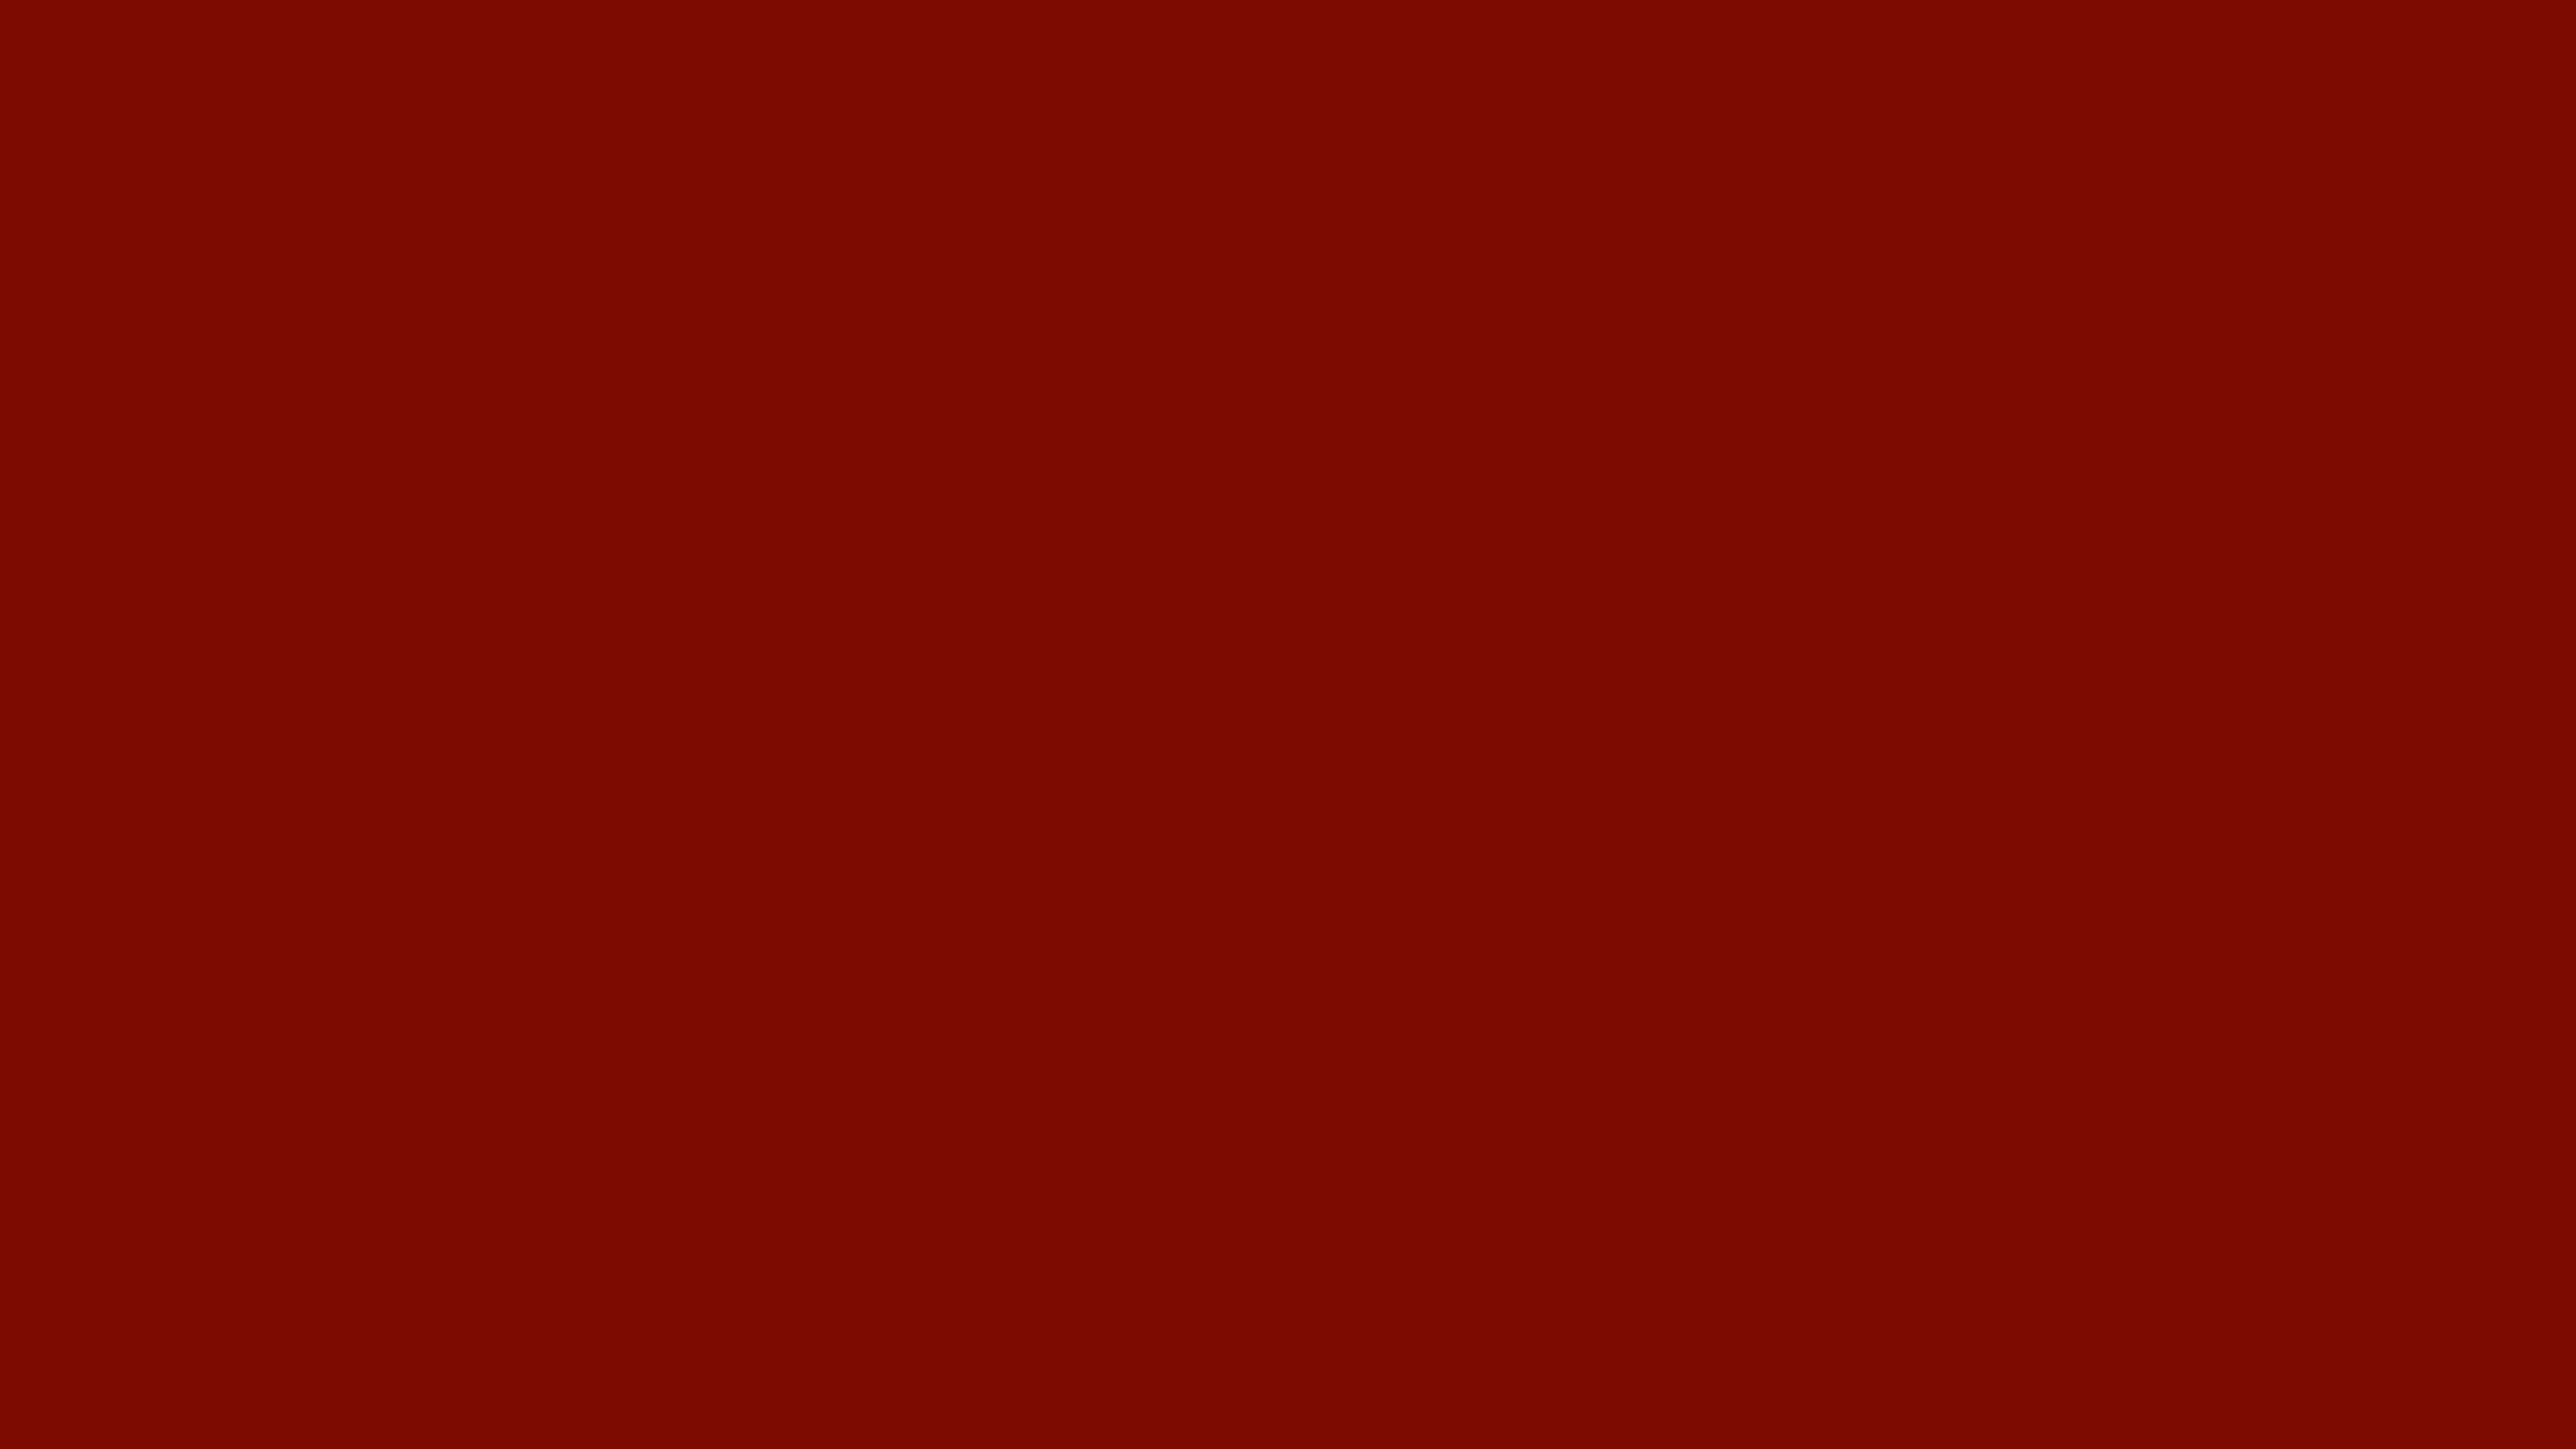 5120x2880 Barn Red Solid Color Background